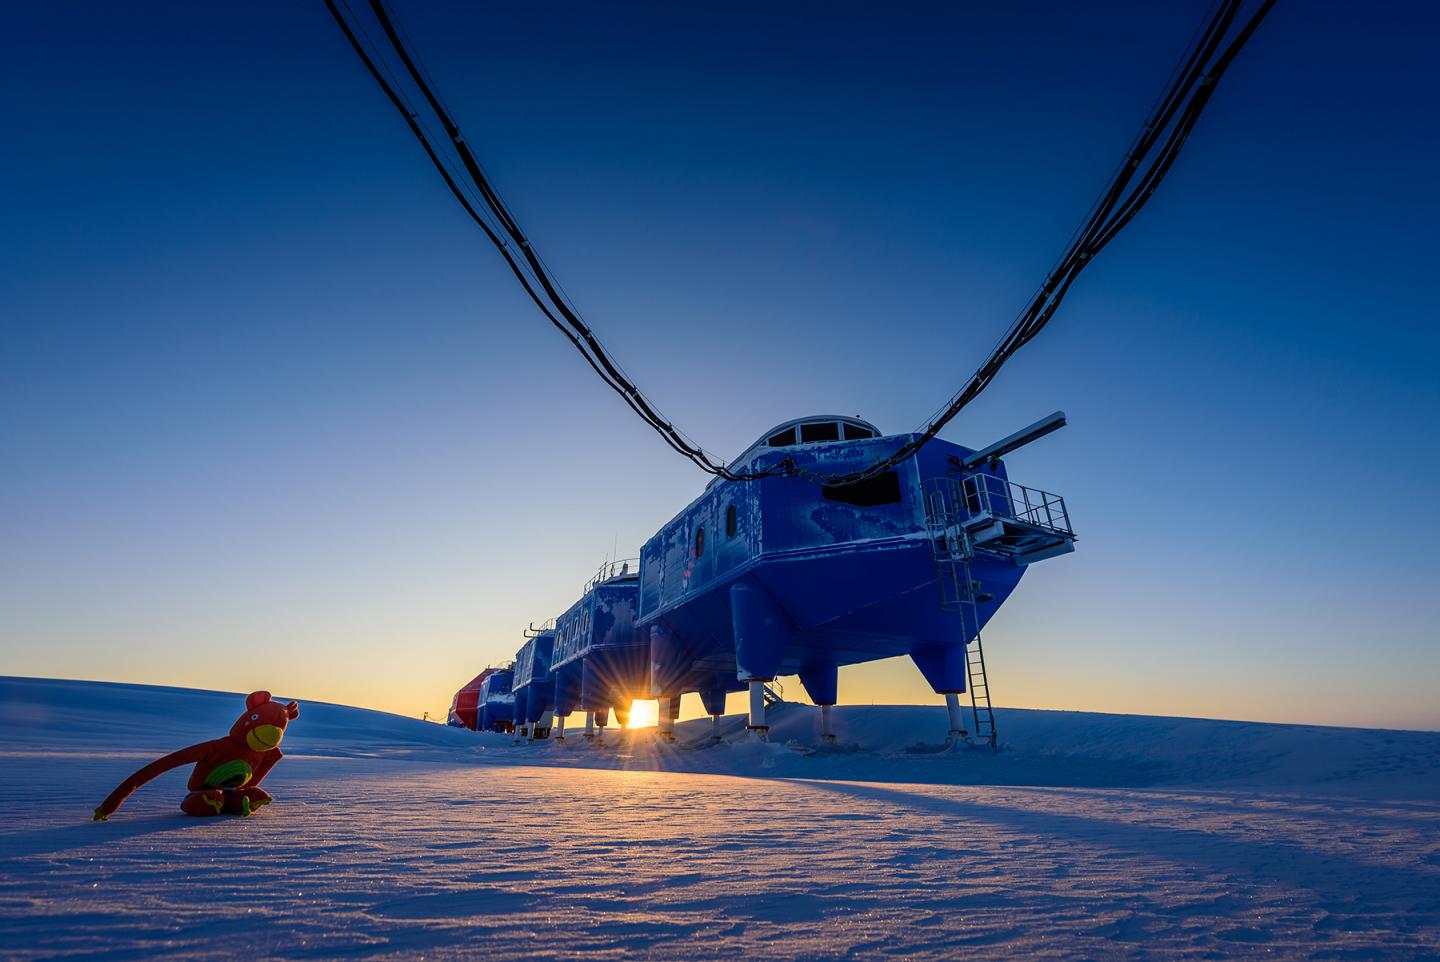 An Image of the British Antarctic Survey's Halley VI Research Station in Antarctica